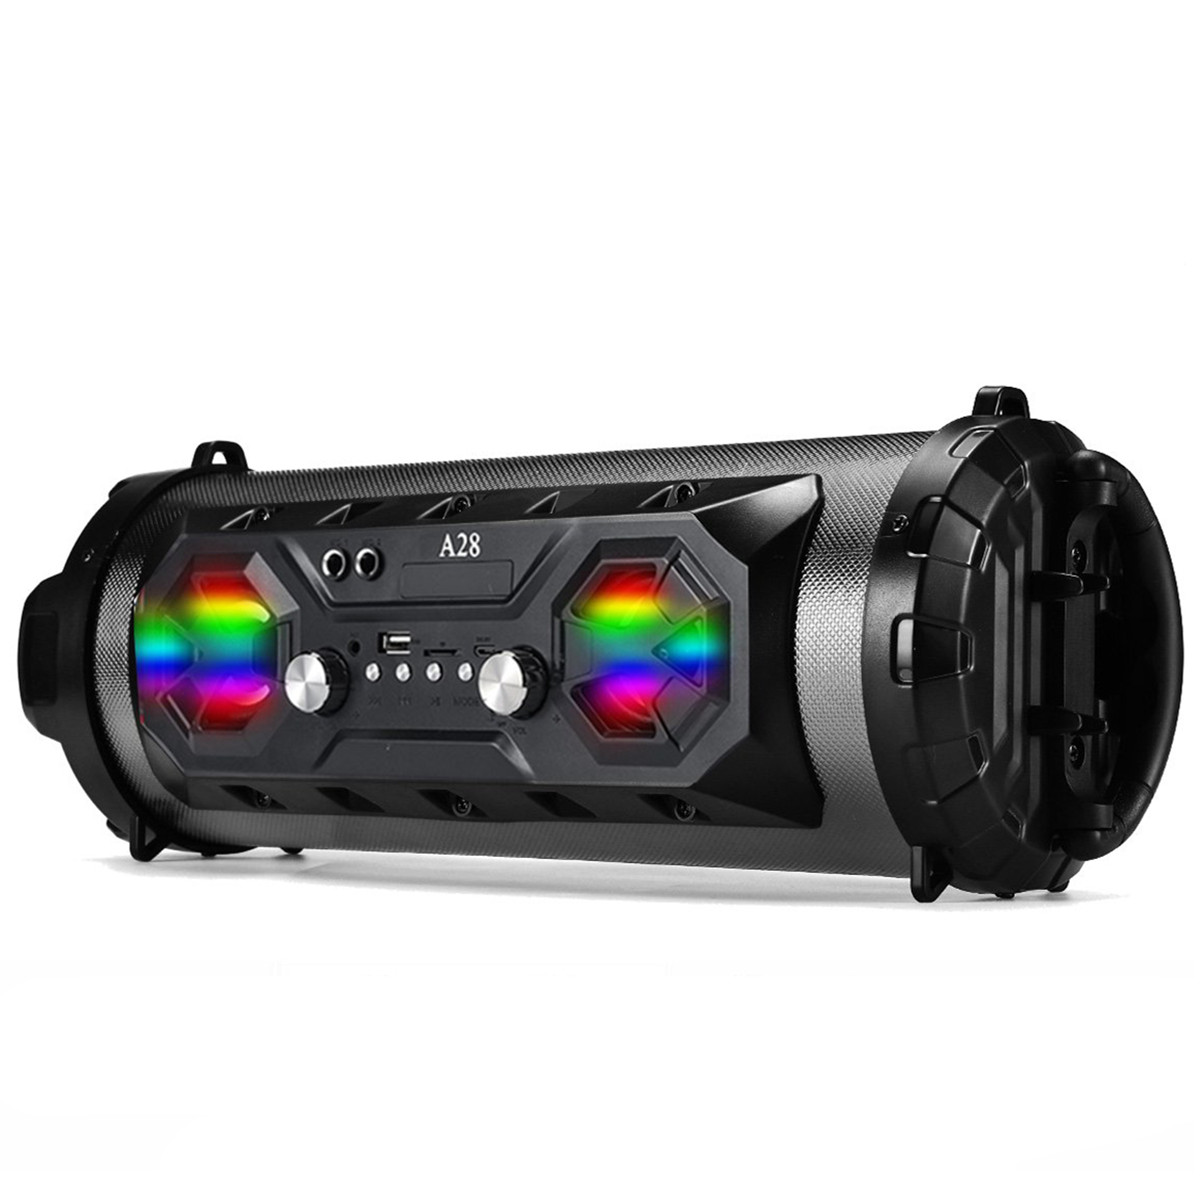 Unique Portable LED Wireless Portable bluetooth 4.2 Speaker Stereo Sound Super Bass HIFI AUX FM Subwoofer Loudspeaker ,RGB Colorful Lights, EQ, Booming Bass, Outdoor Speaker for Home, Party, Camping - image 1 of 9